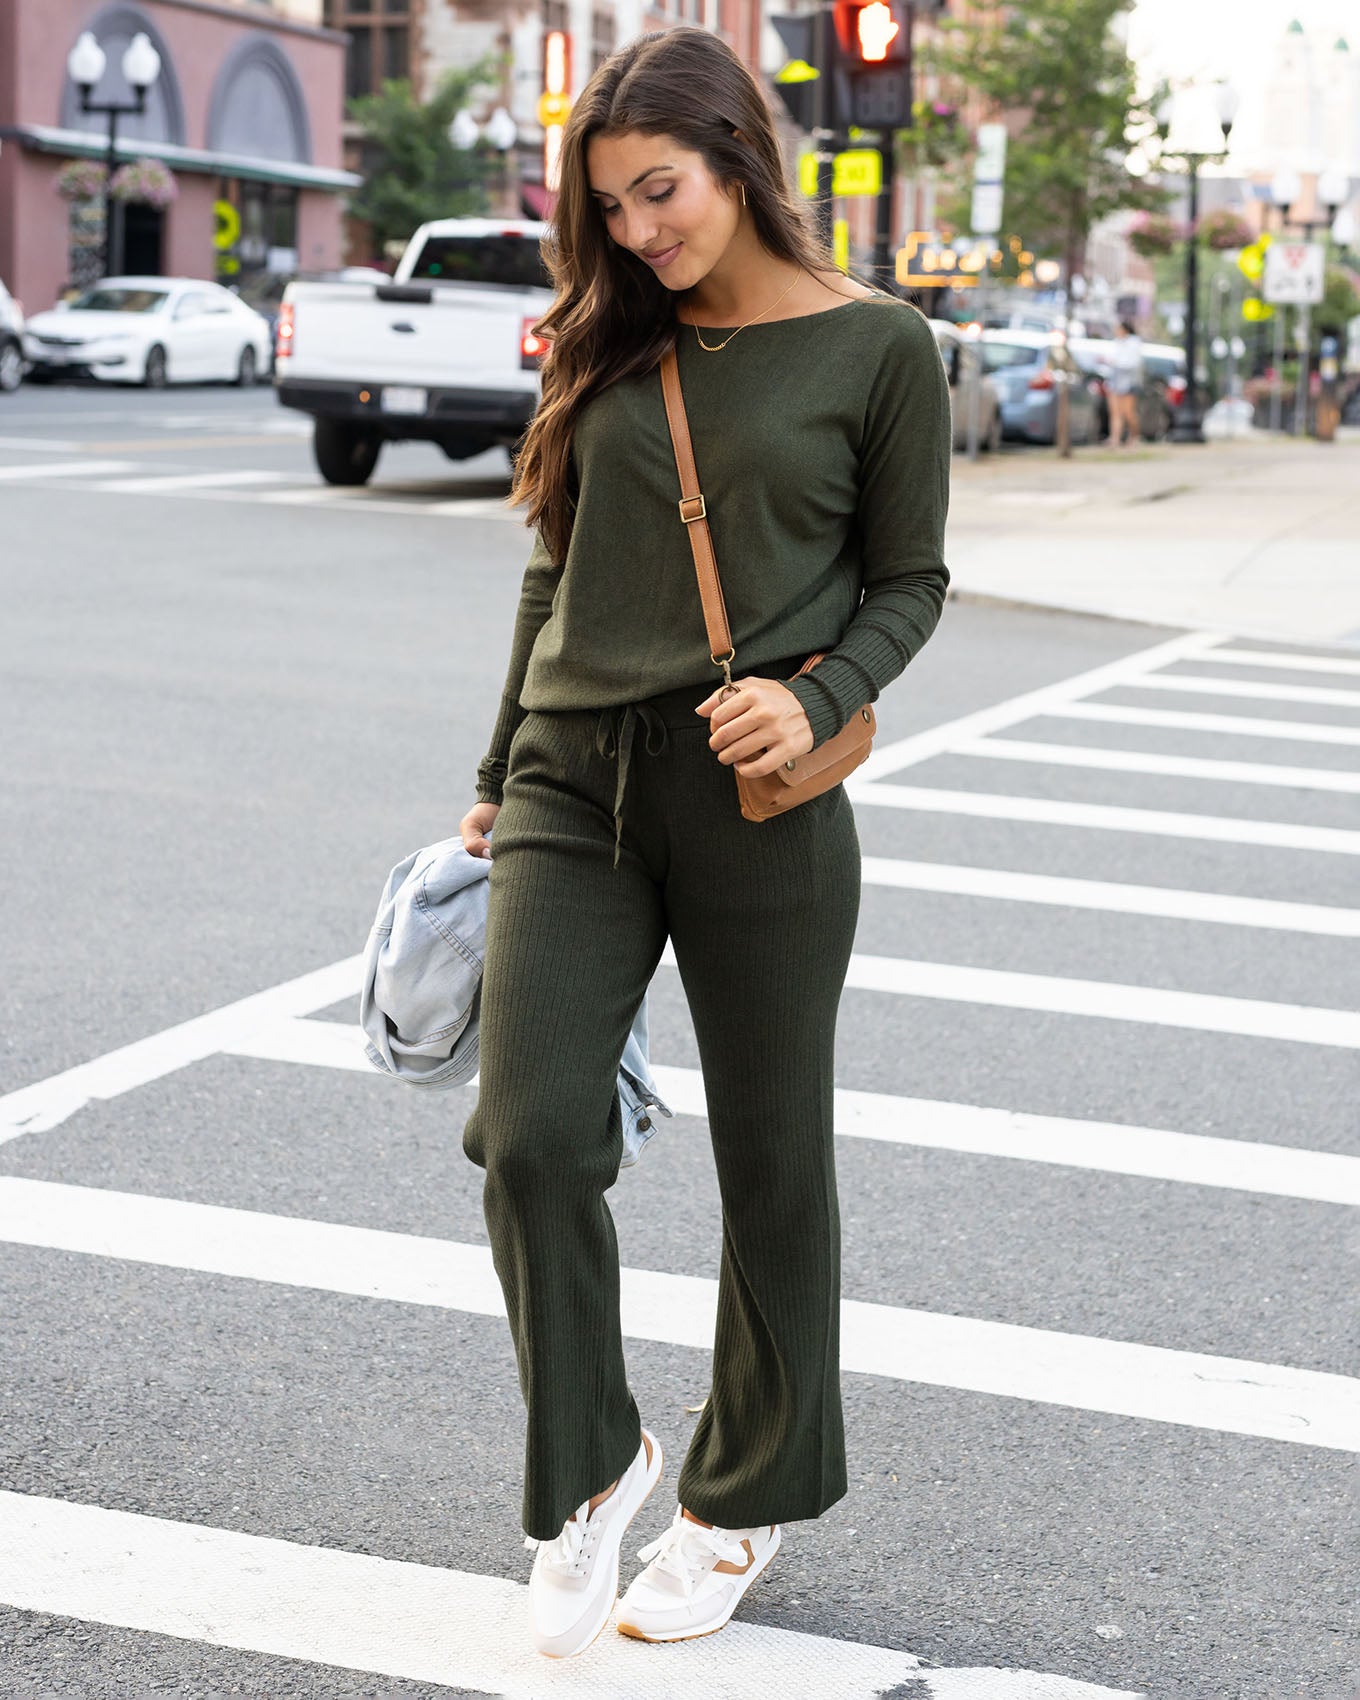 Americas Dairyland Inspires New Stan Smith Spikeless Golf Shoe, Track Pants  & Sneakers – Rvce News, Gabrielle Union Is So '90s in a Chunky Sweater